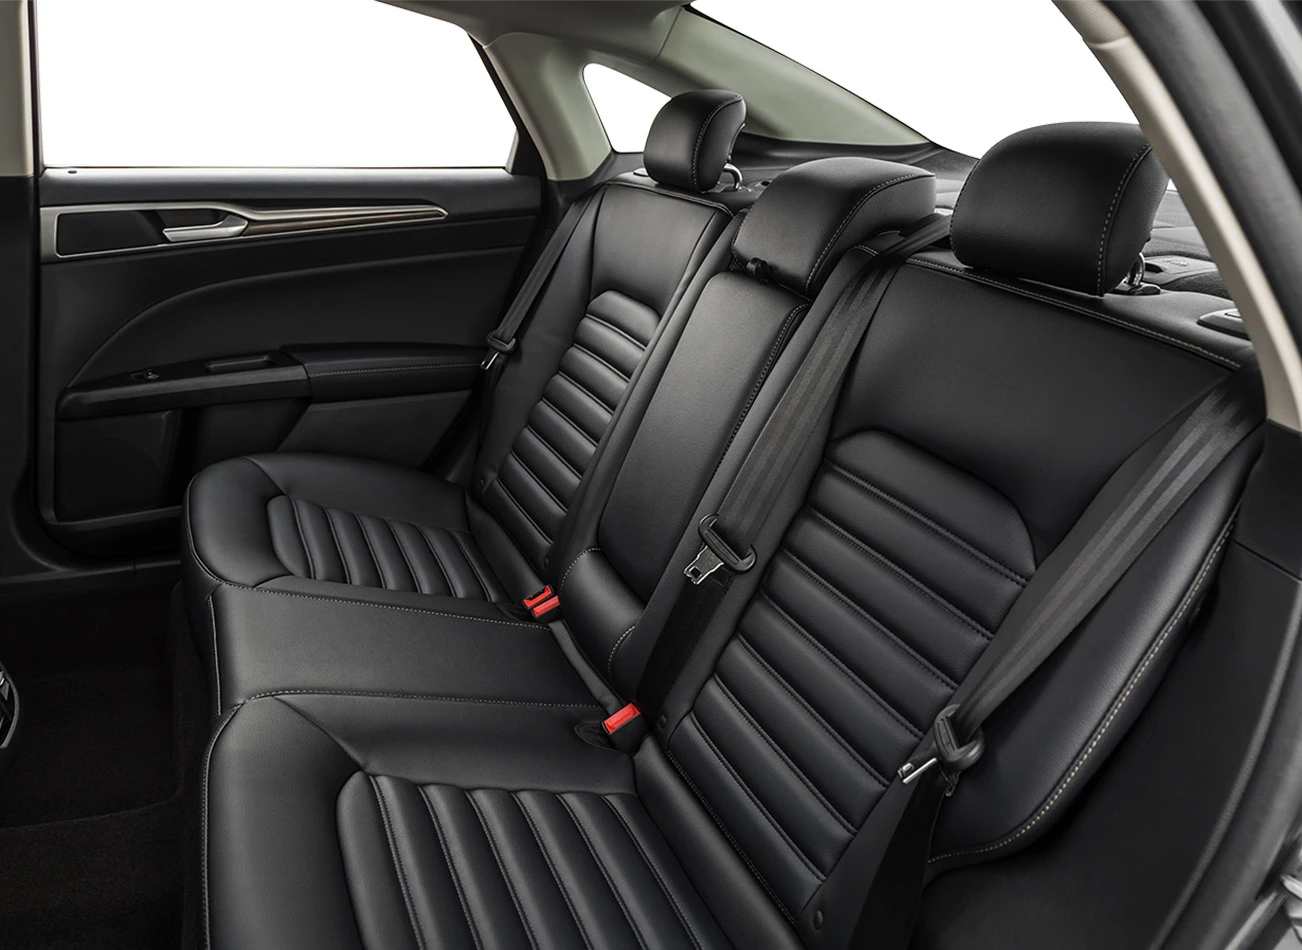 2019 Ford Fusion Hybrid: Backseats upholstered in vegan leather | CarMax